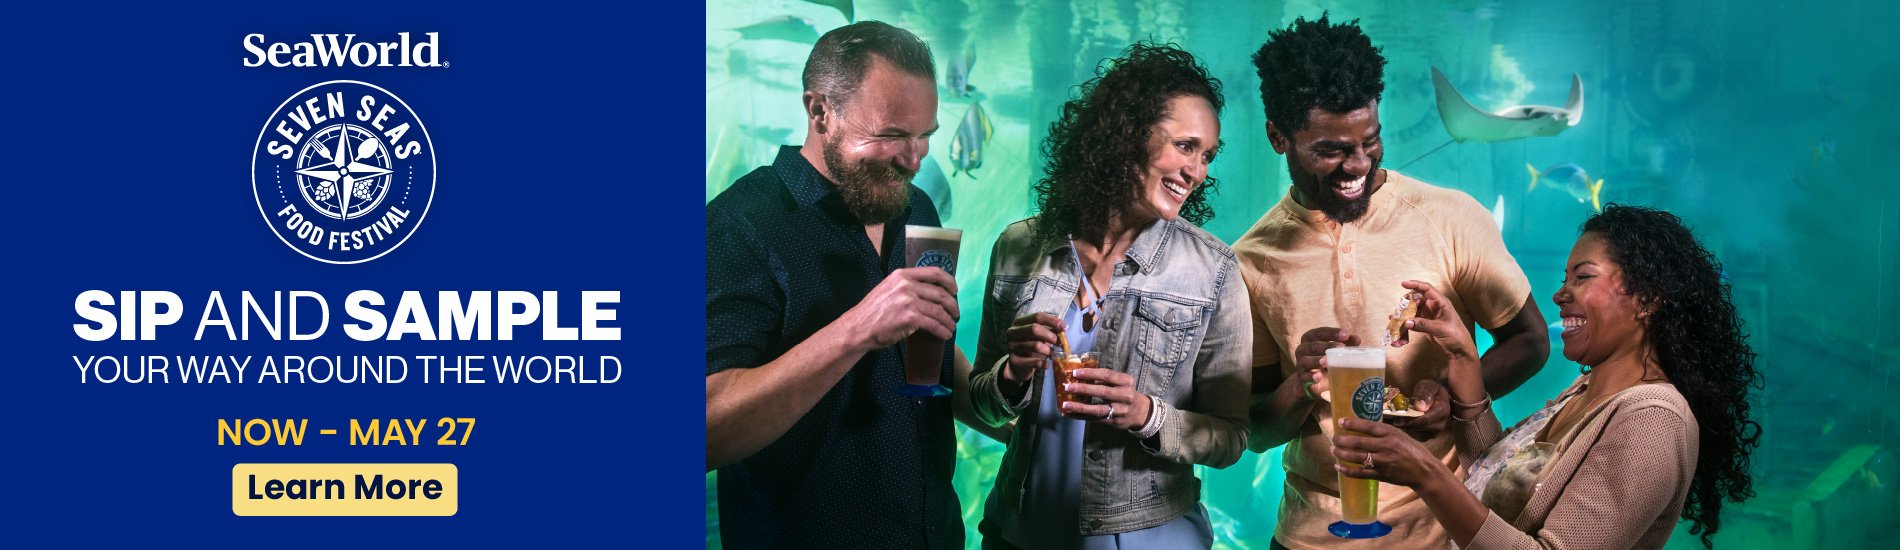 SeaWorld Seven Seas Food Festival: Sip and Sample your way around the world! Now through May 27